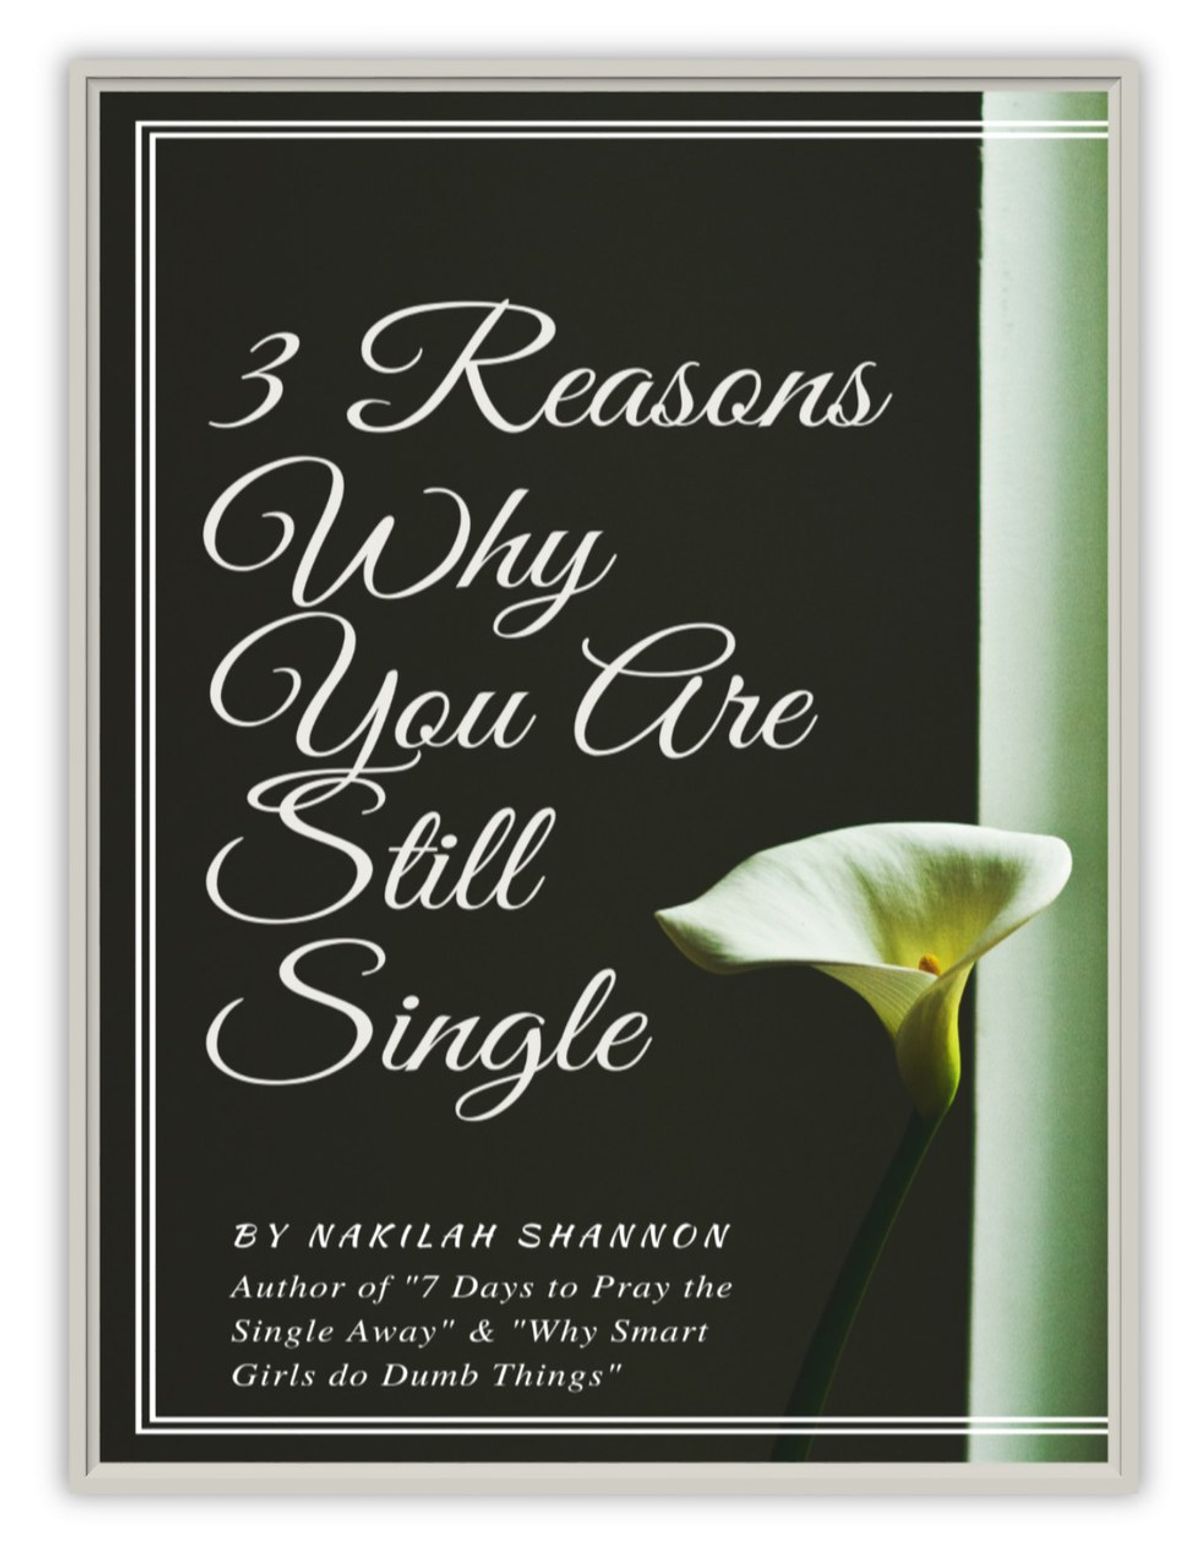 3 Reasons Why You Are Still Single